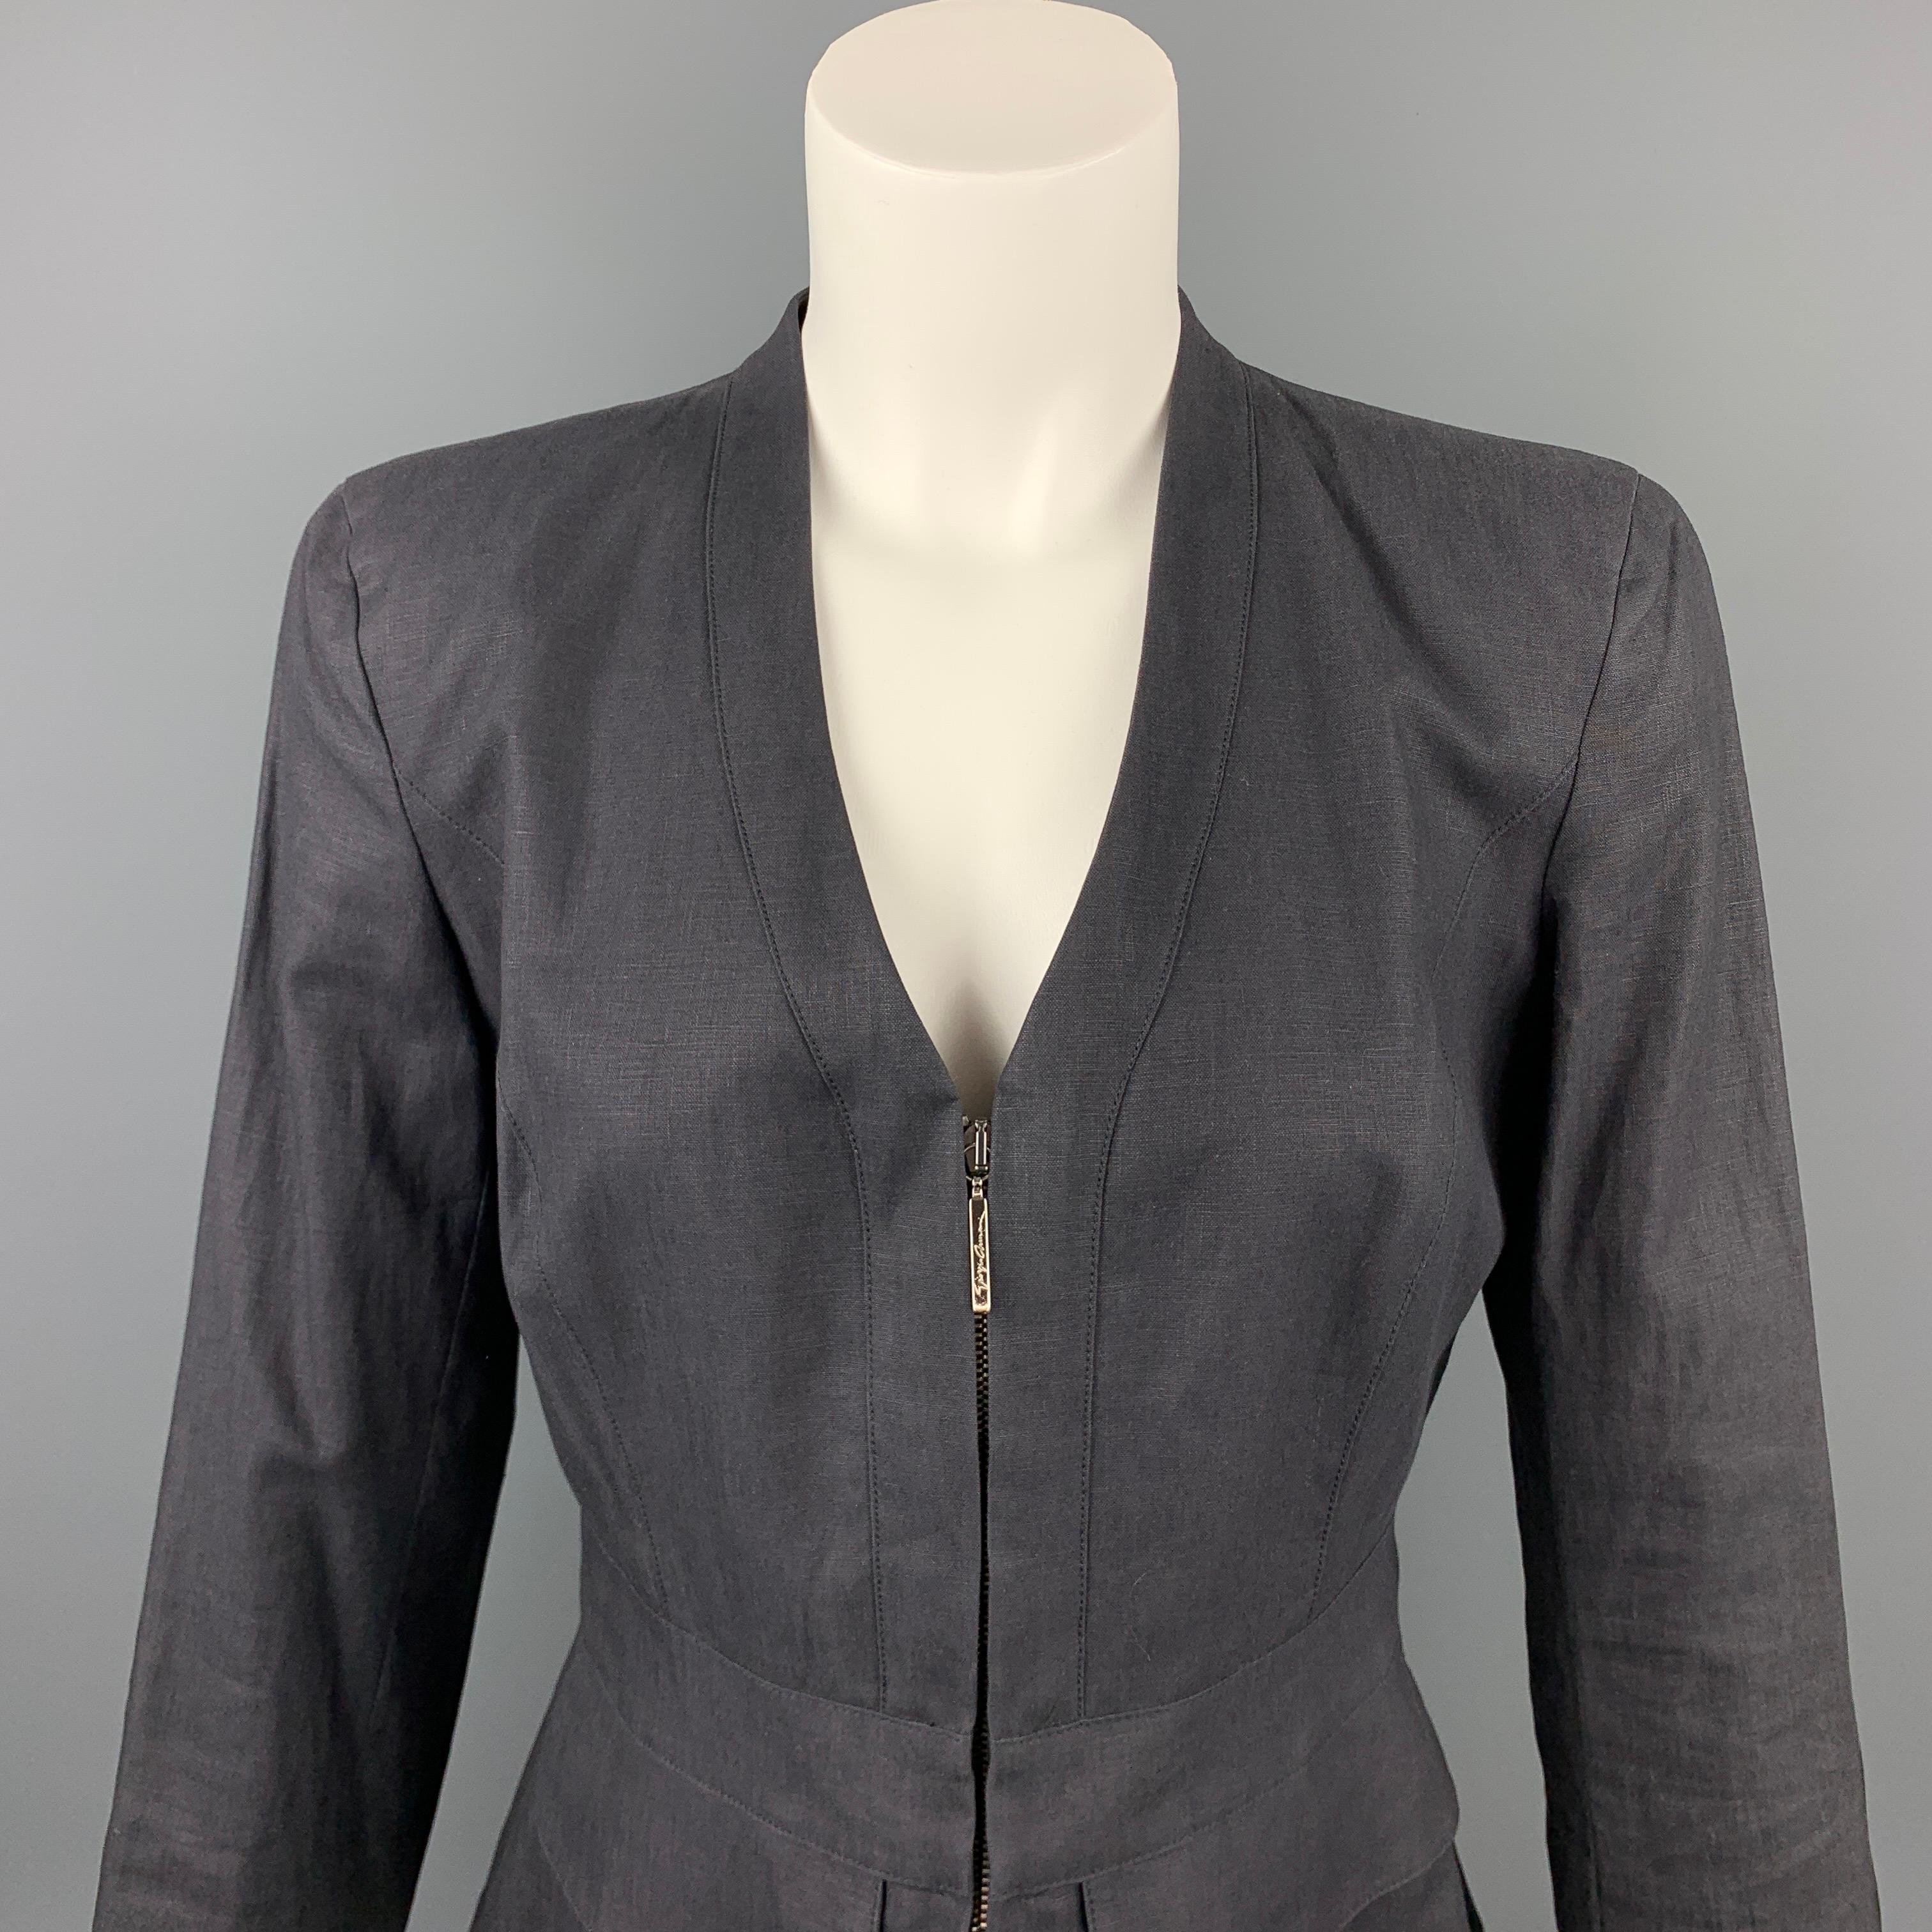 GIORGIO ARMANI jacket comes in a slate silk / linen with no collar featuring flap pockets, top stitching, and a zip up closure. Made in Italy.

Very Good Pre-Owned Condition.
Marked: IT 42

Measurements:

Shoulder: 16 in. 
Bust: 34 in. 
Sleeve: 23